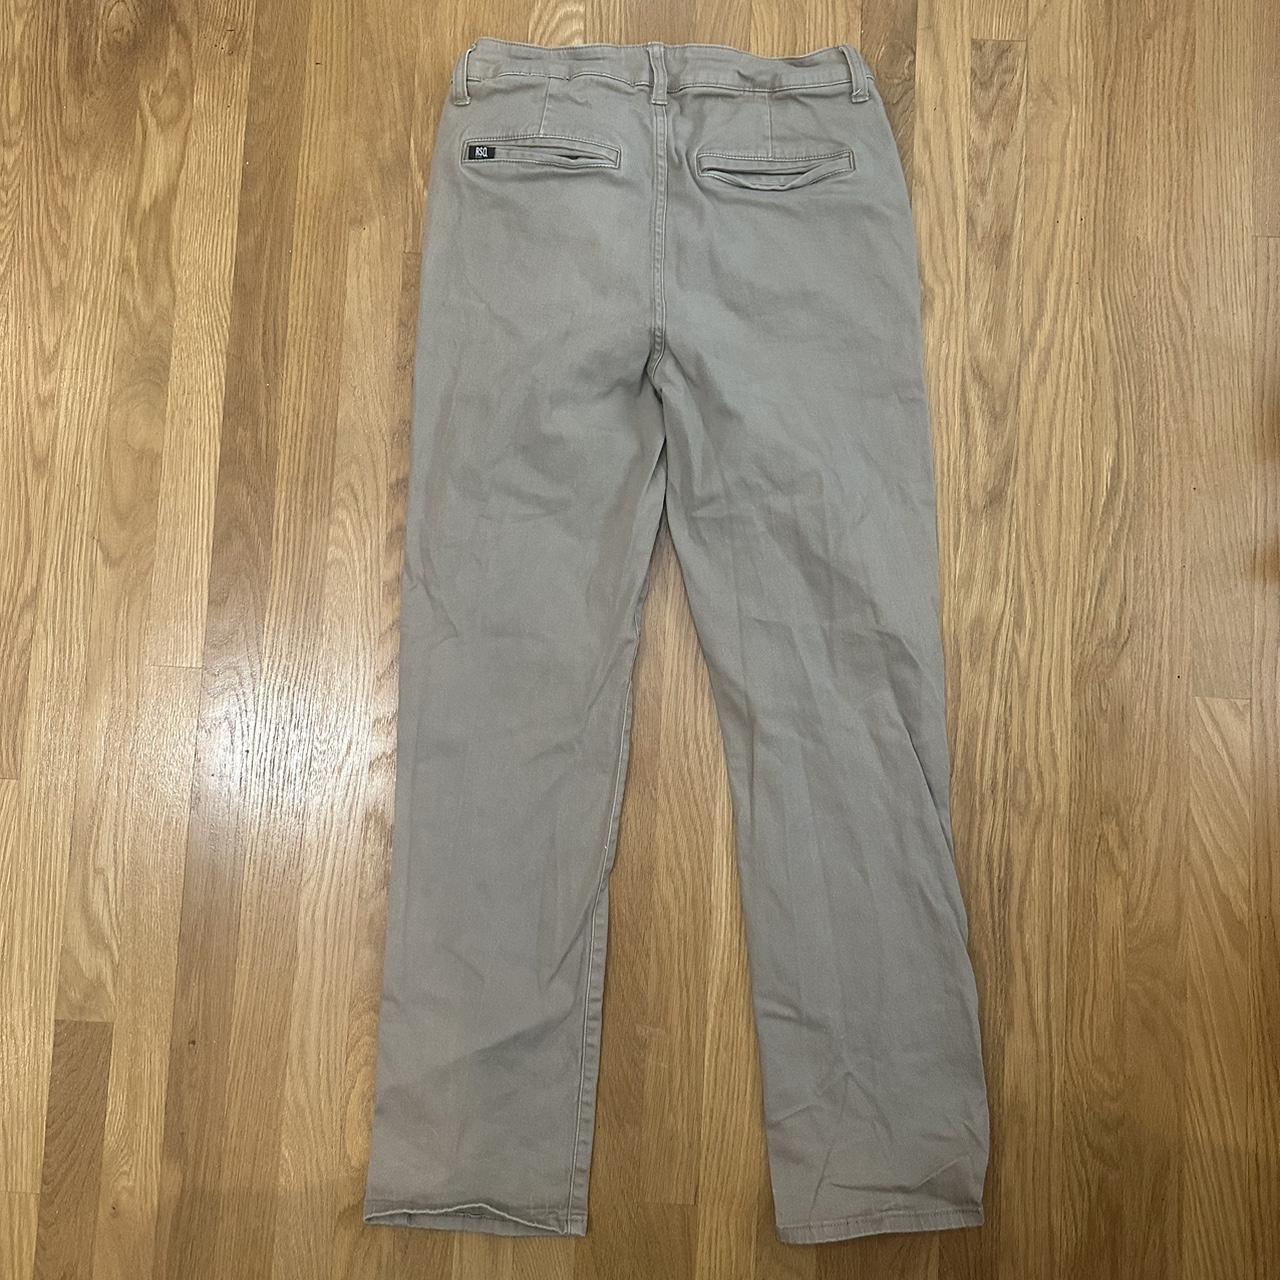 Gray 33x32 RSQ pants BRAND NEW never used Lost the - Depop